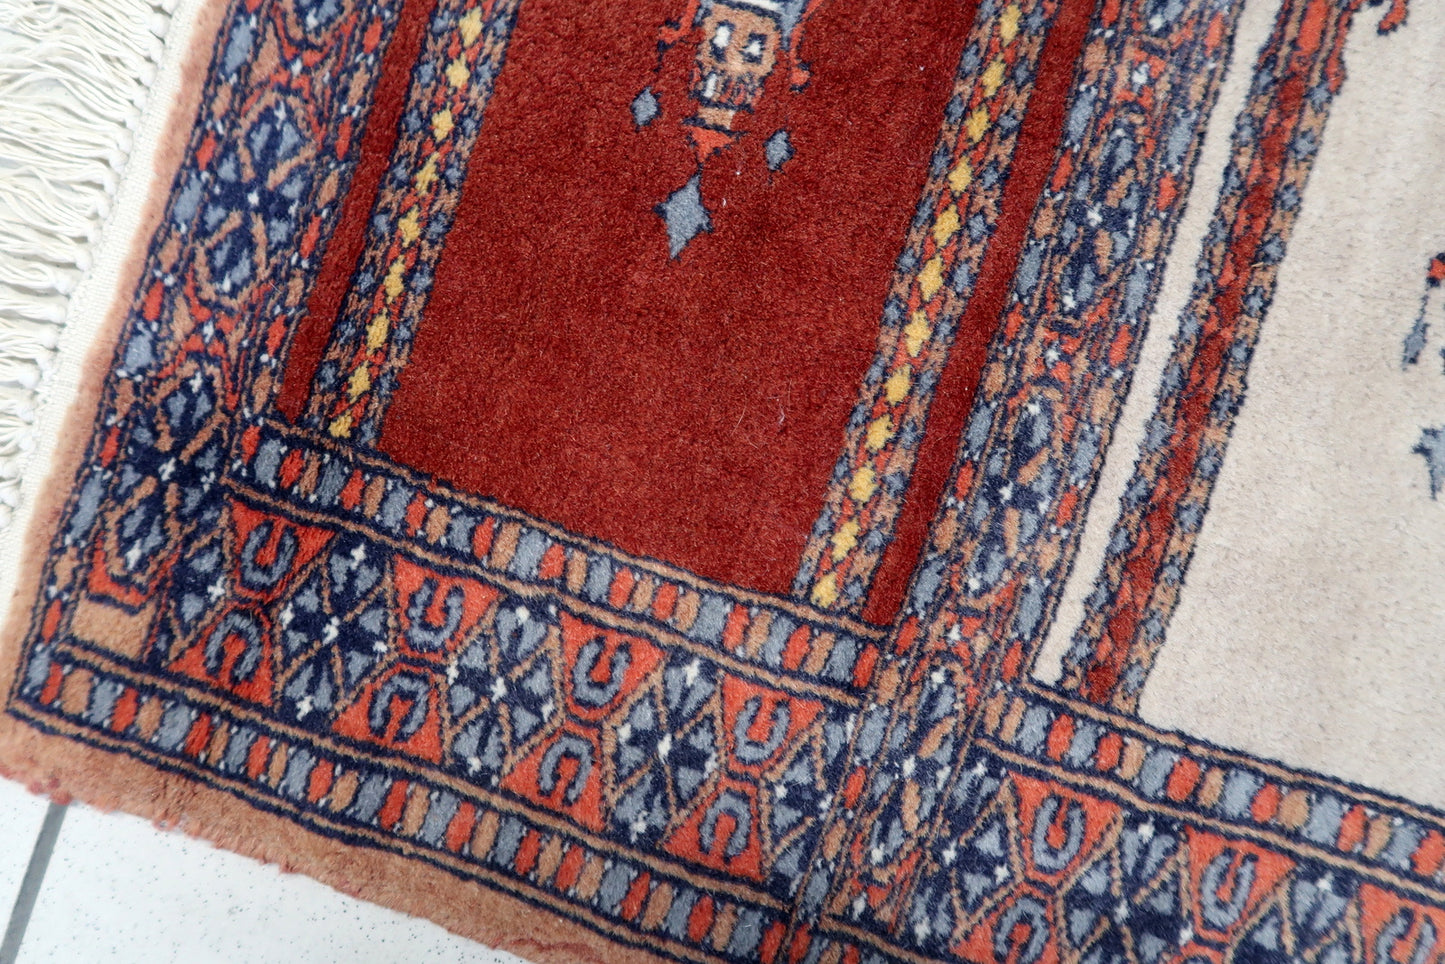 Side angle view of the rug, showcasing its compact yet impactful size and square shape